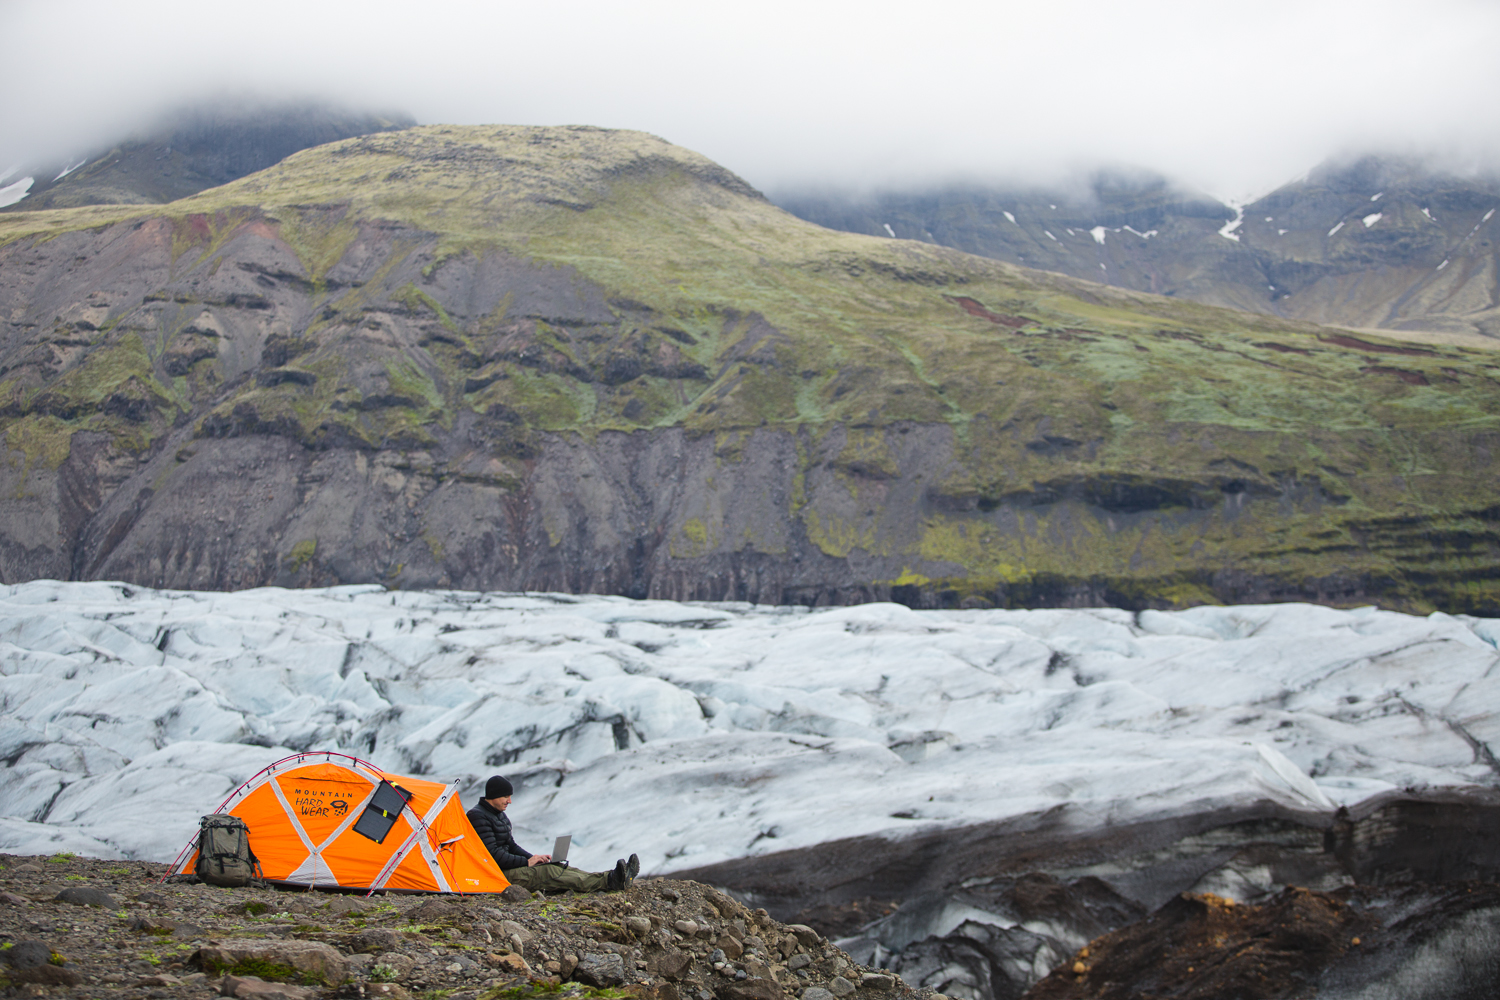 Using the Kirabook at the foot of a glacier in Iceland to back up my images.